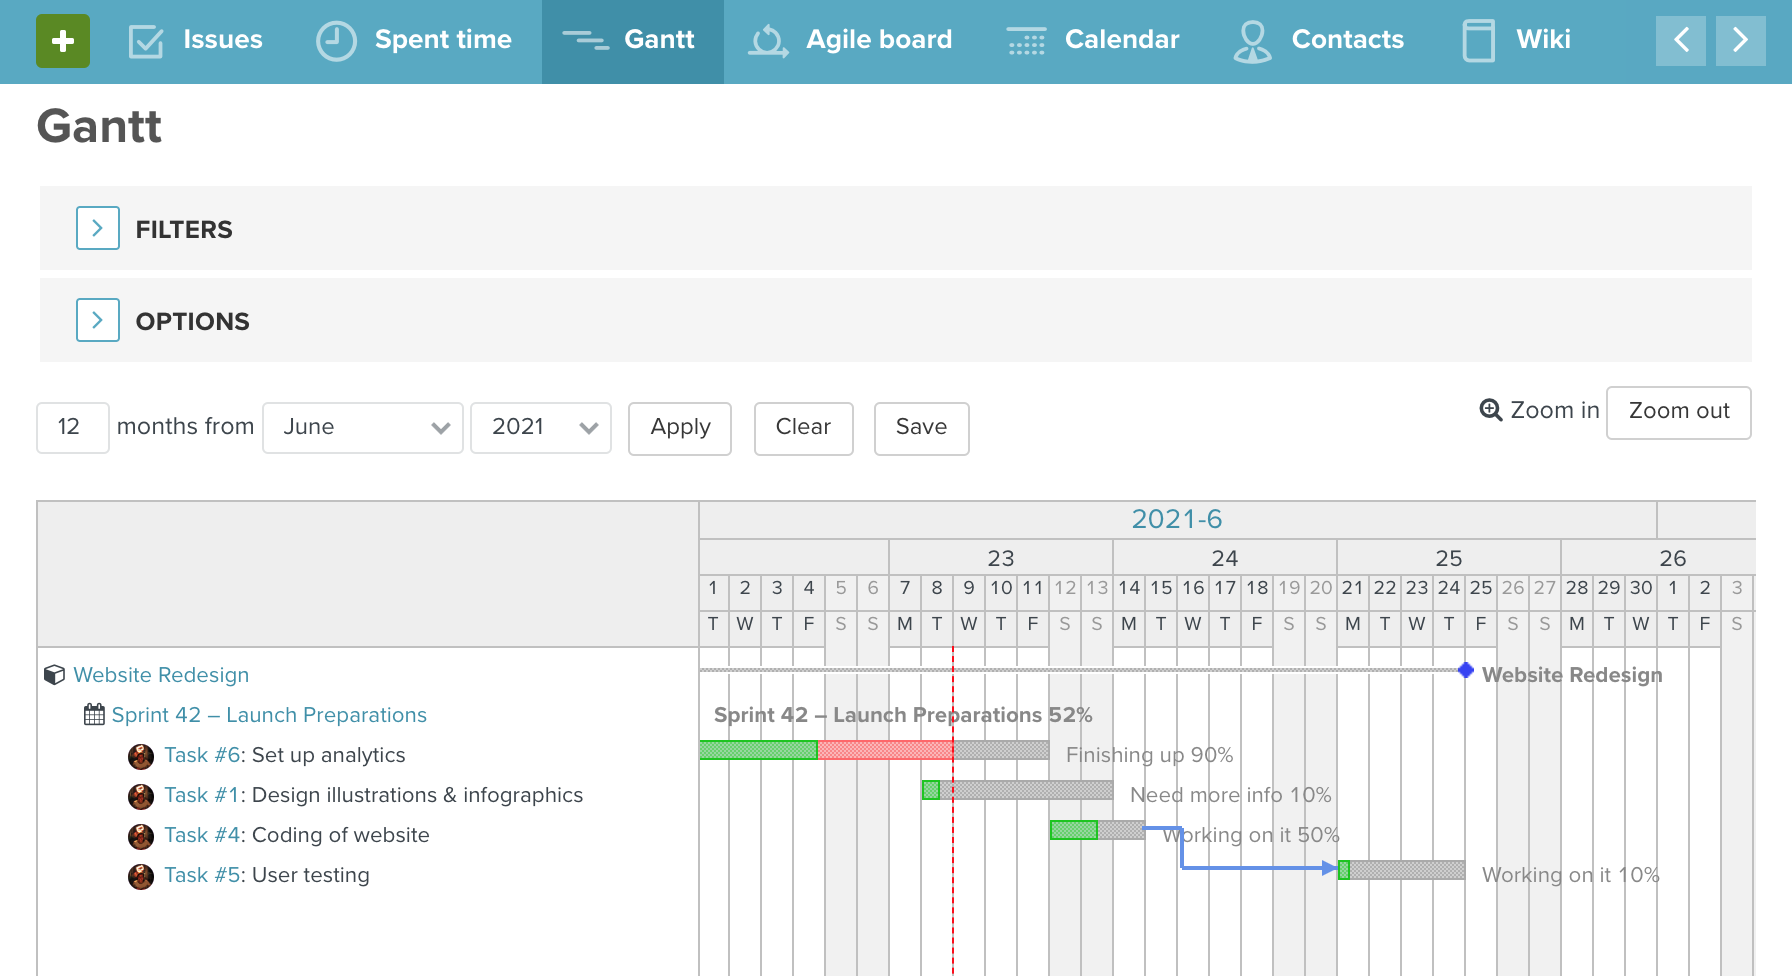 Gantt Chart issues and timeline